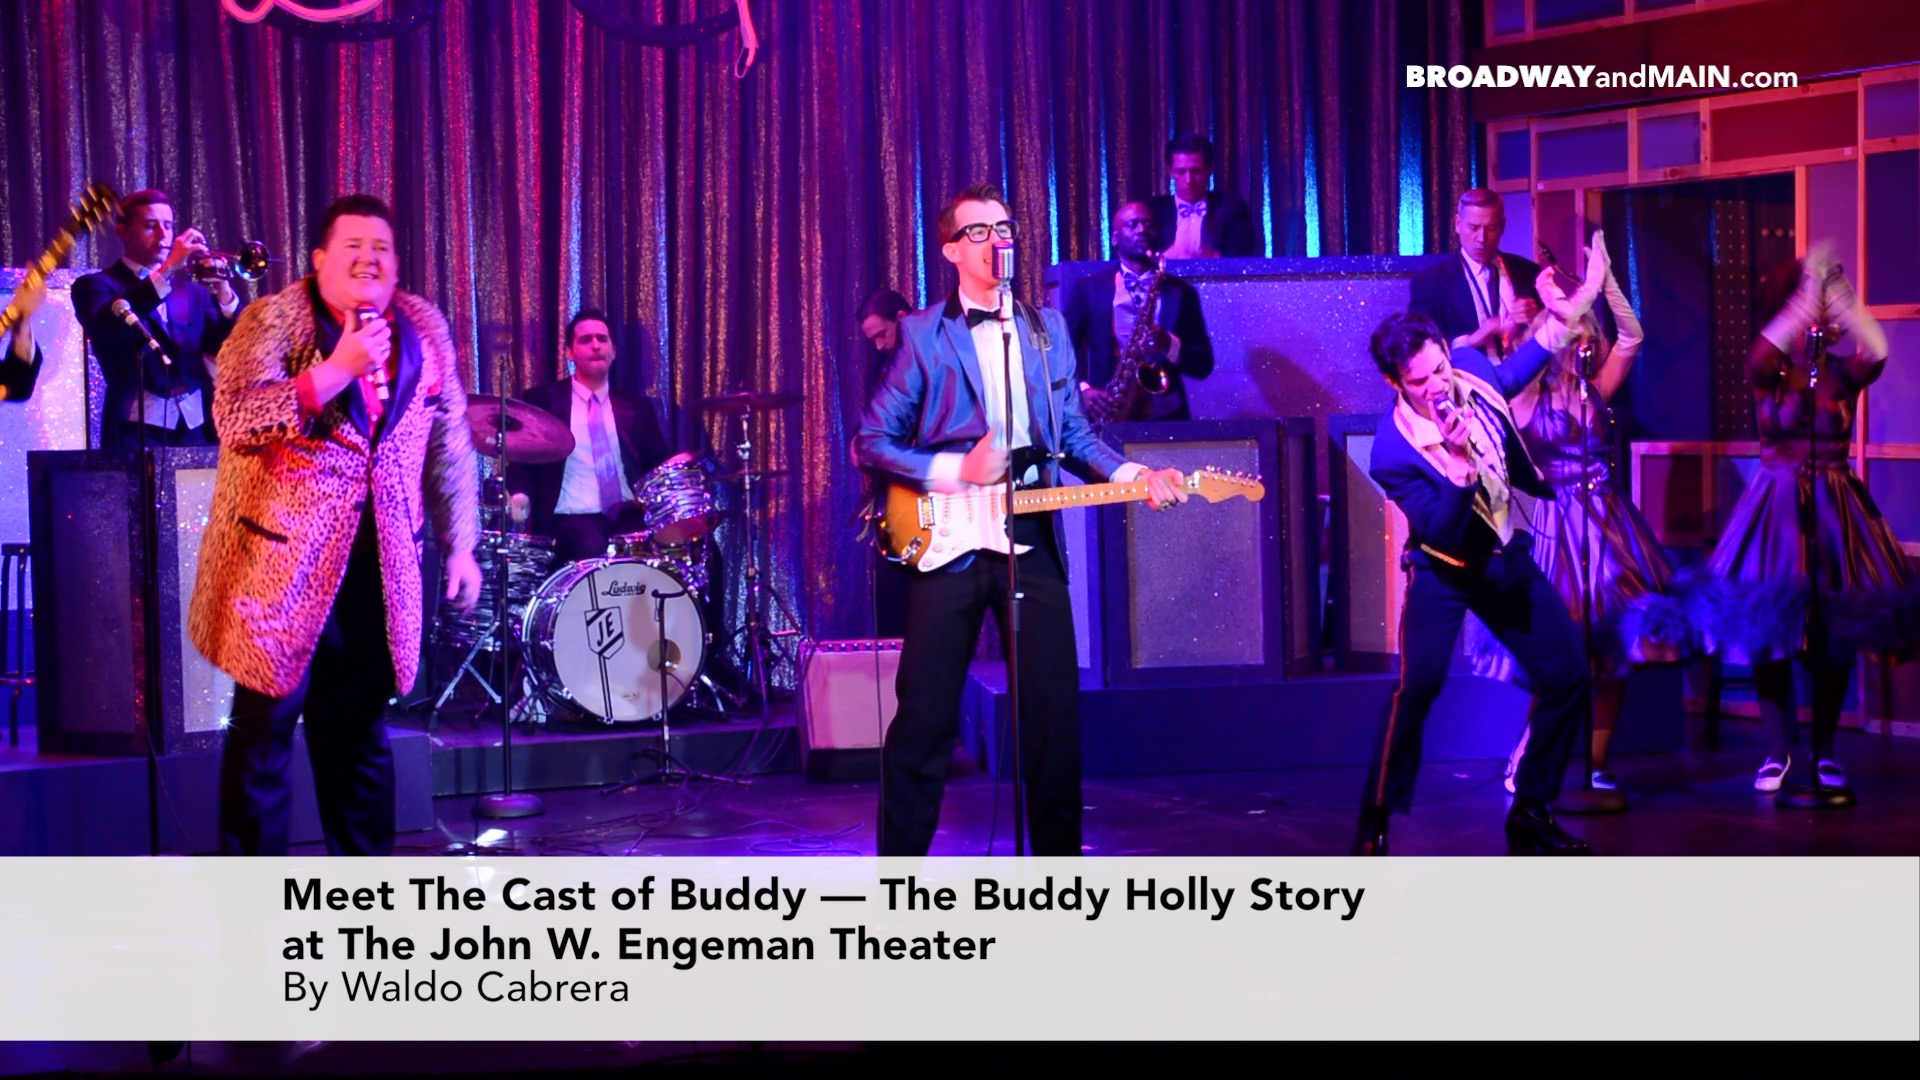 Meet The Cast of Buddy - The Buddy Holly Story at The John W Engeman Theater